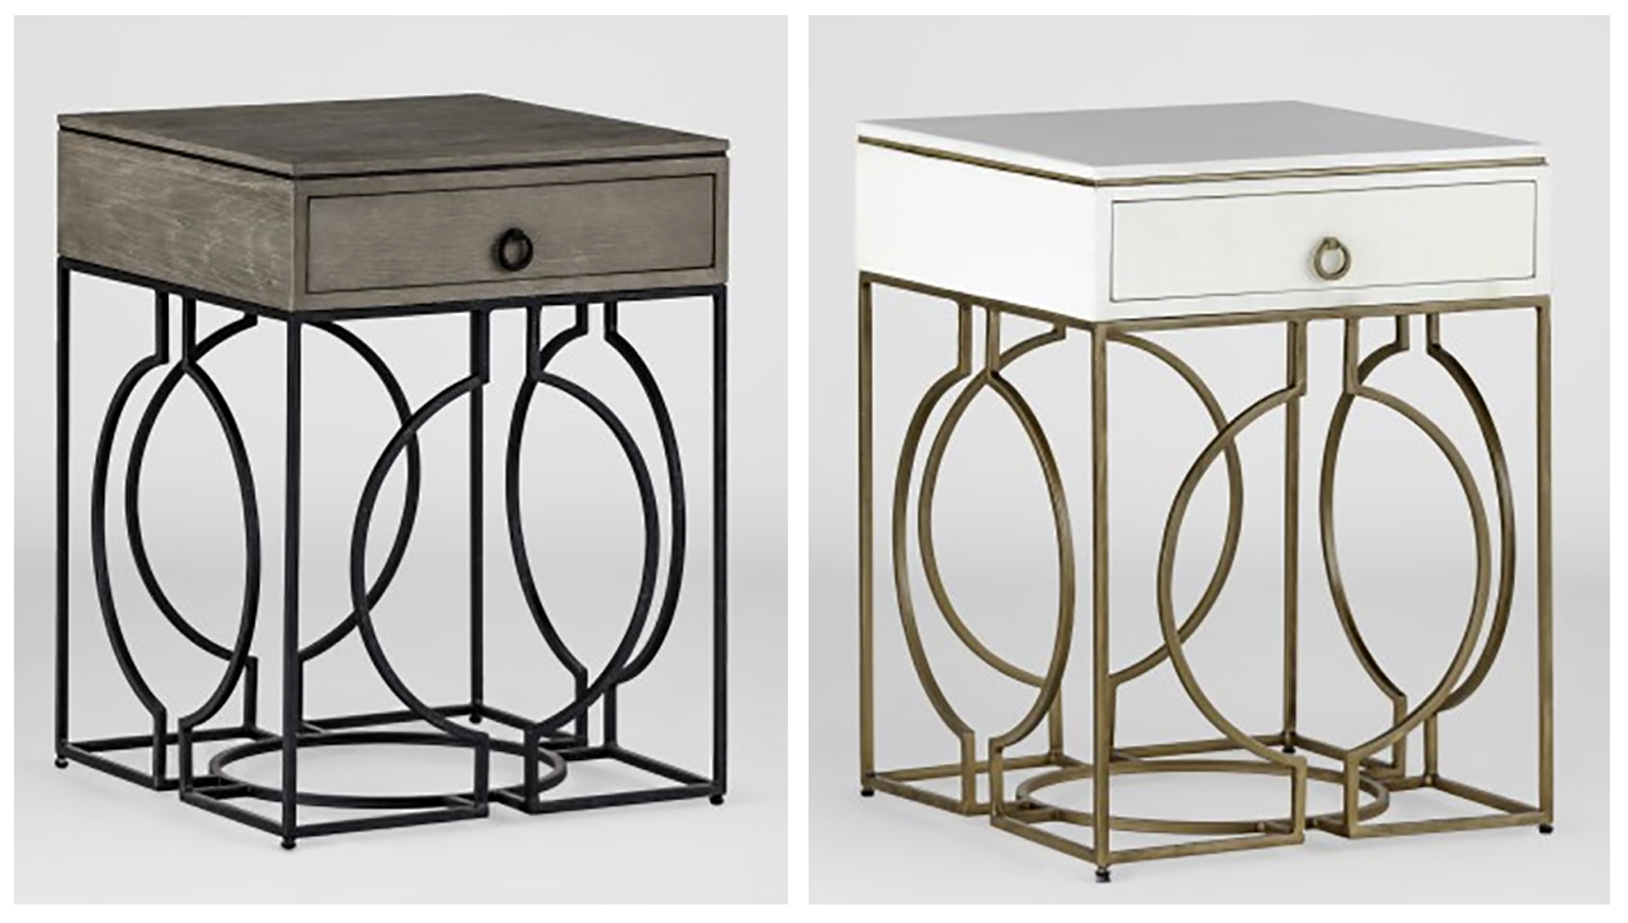 gabby newest accent tables rise the occasion cedric and cersei copy industrial chic table large circular tablecloths cocktail end basket brass bookends target look side pier one